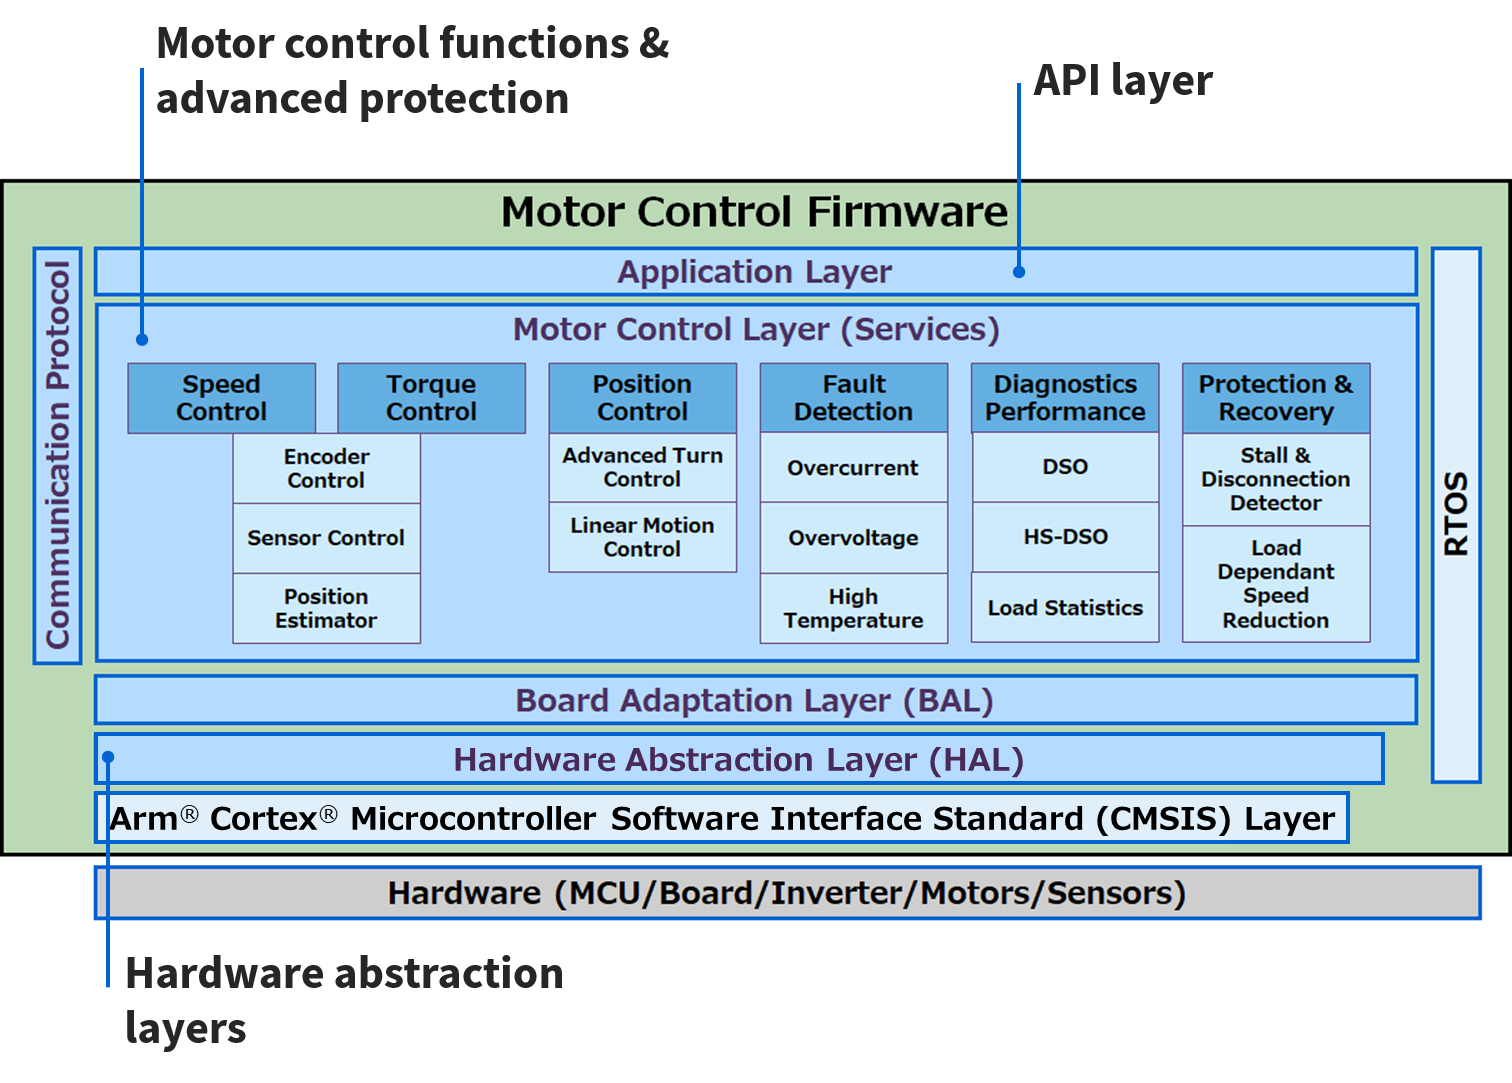 Image of Motor Control Firmware